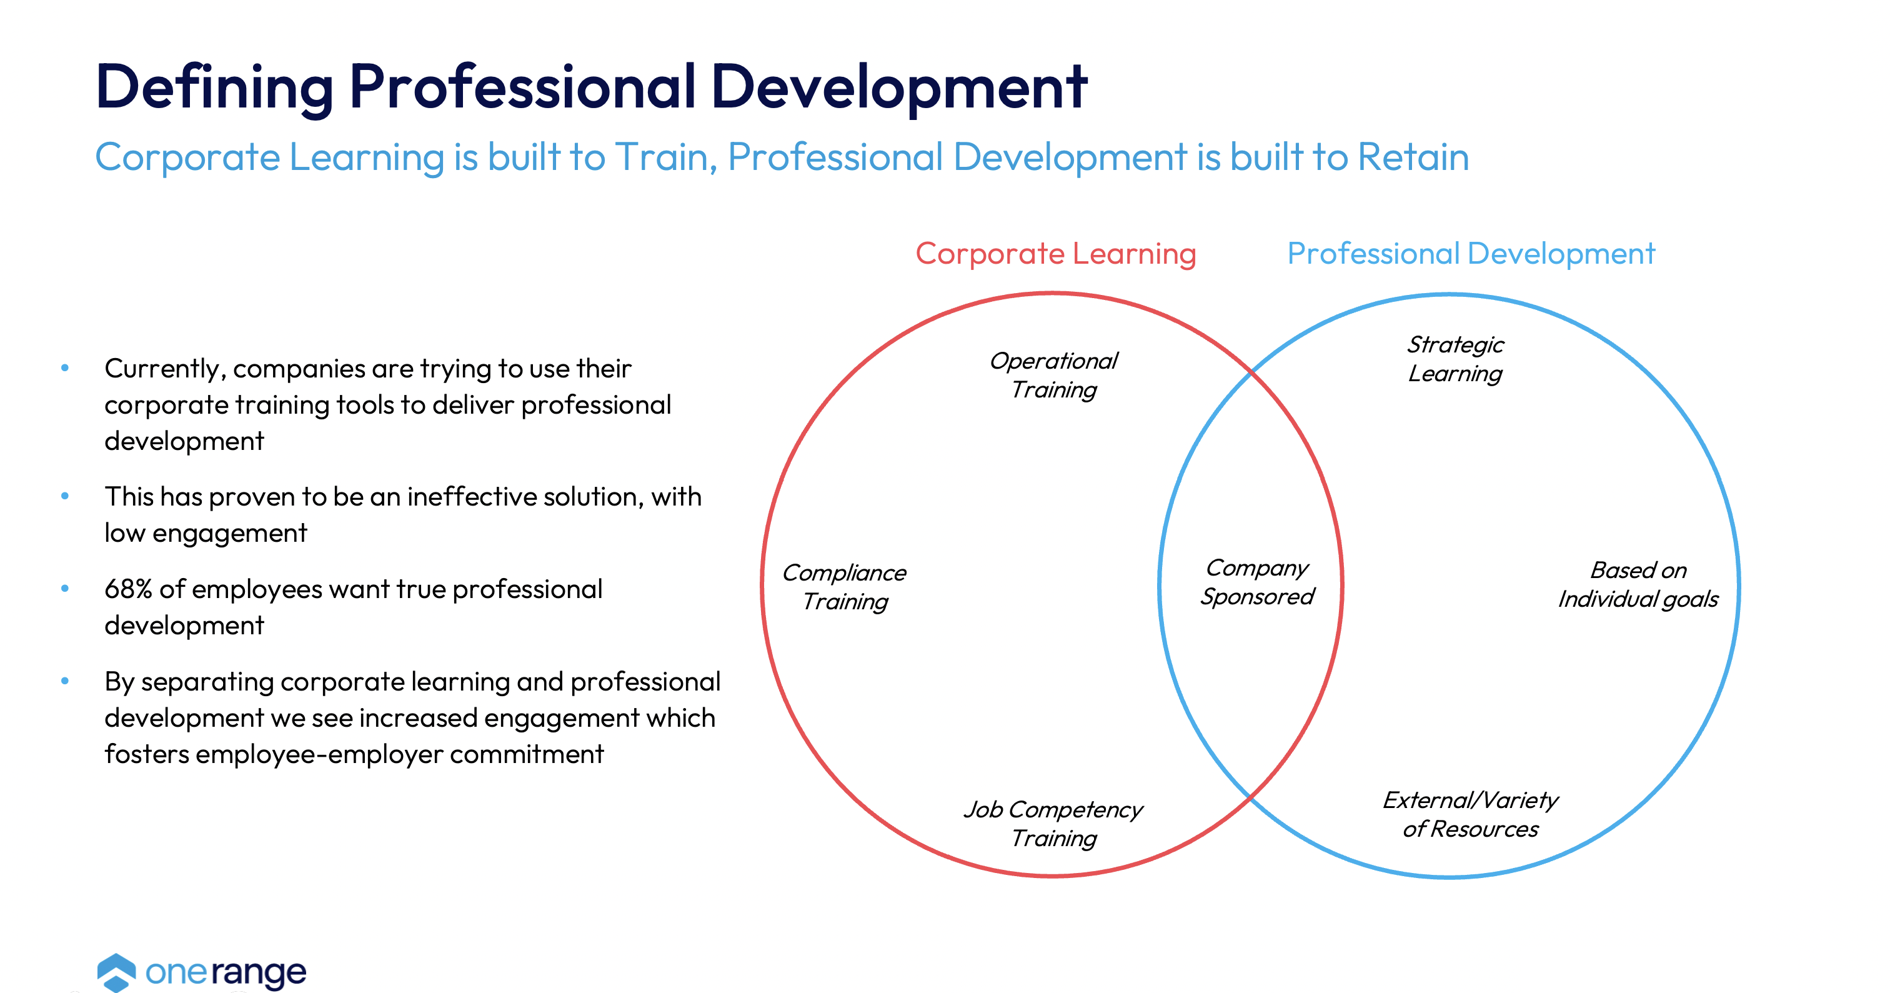 Visual with a Venn Diagram comparing corporate learning to professional development